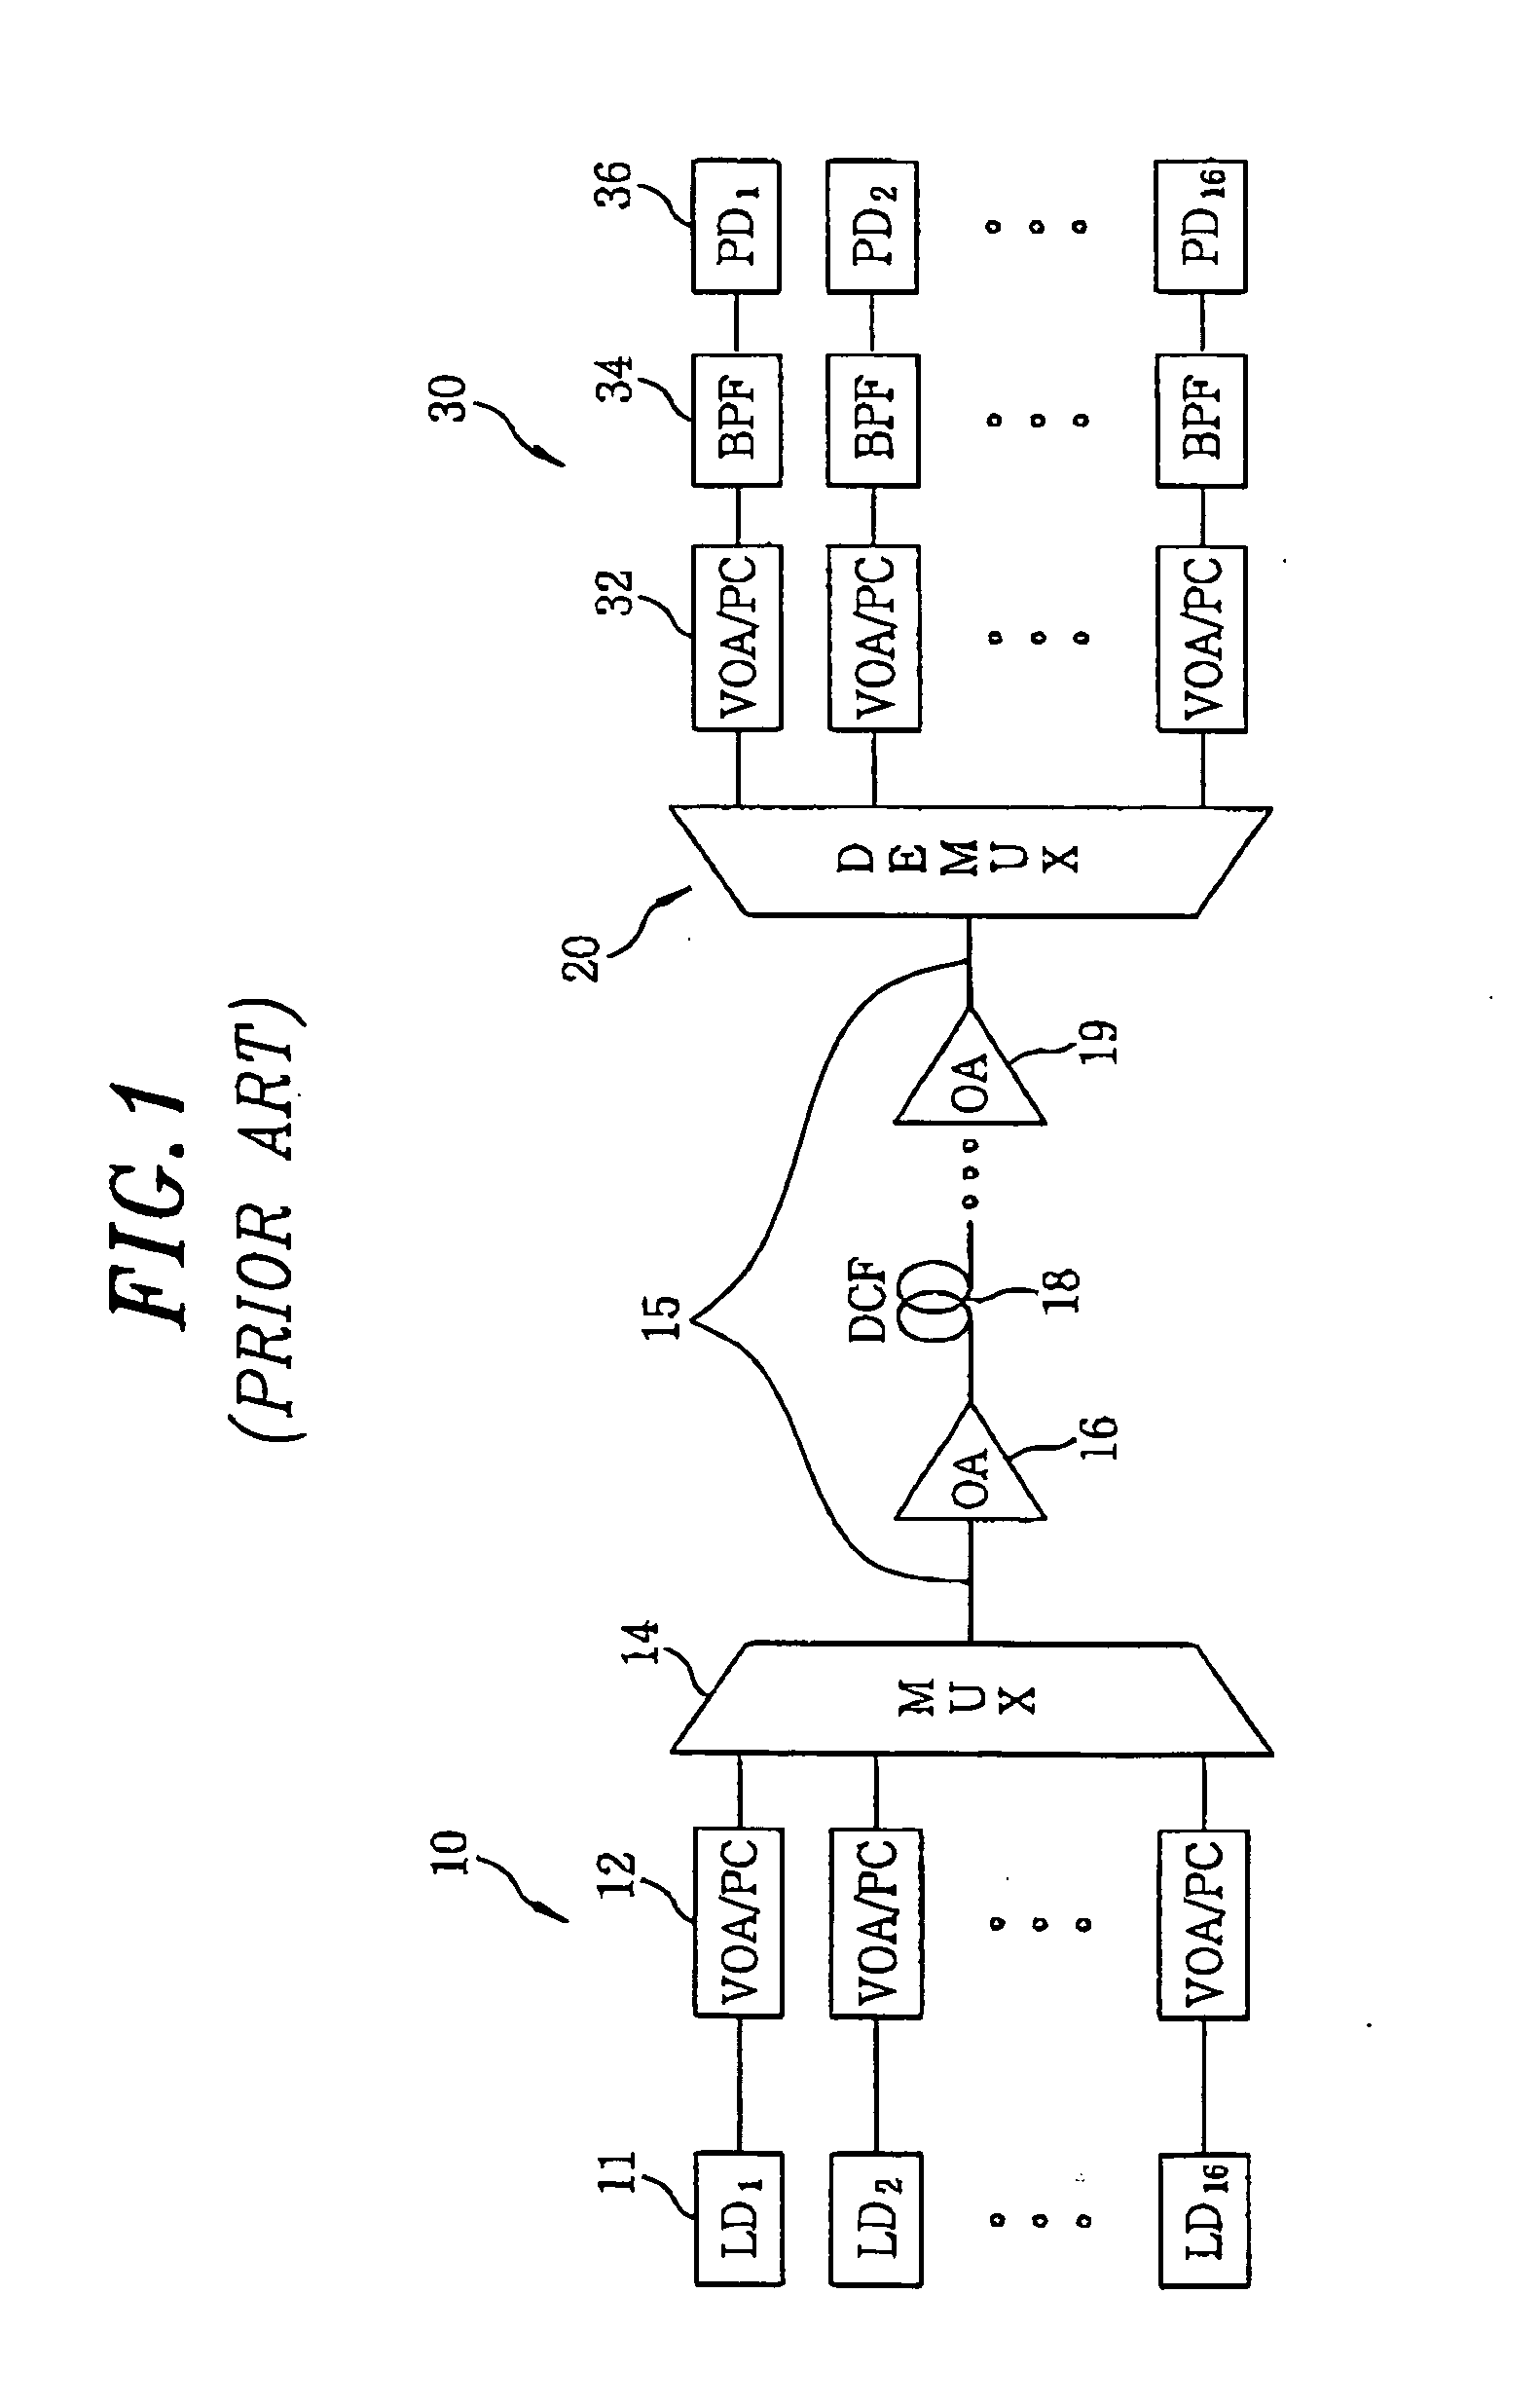 WDM-PON having optical source of self-injection locked fabry-perot laser diode